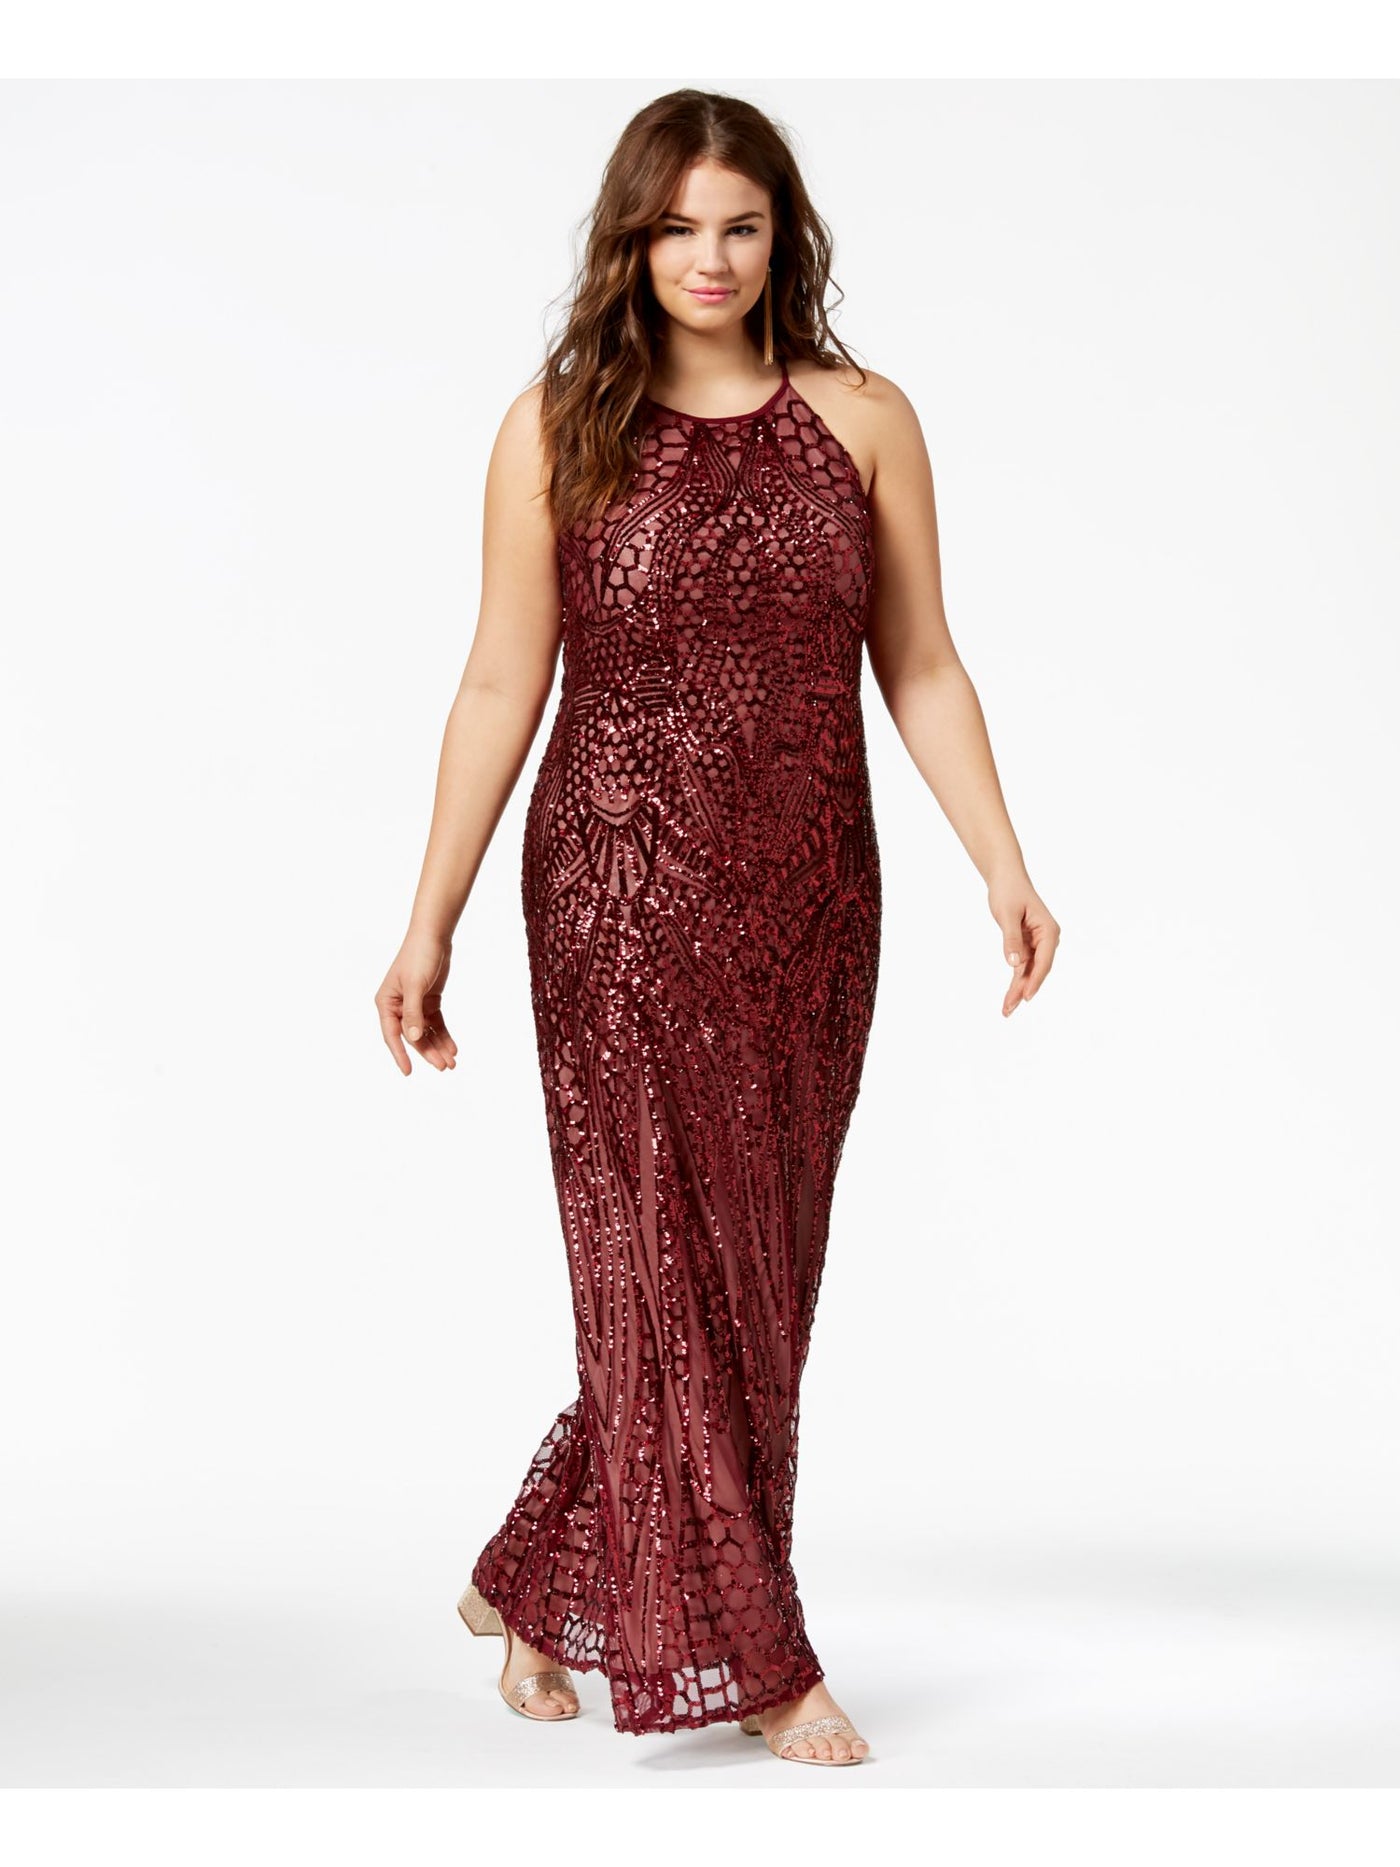 MORGAN & CO Womens Burgundy Sequined Zippered Spaghetti Strap Halter Full-Length Evening Fit + Flare Dress 14W